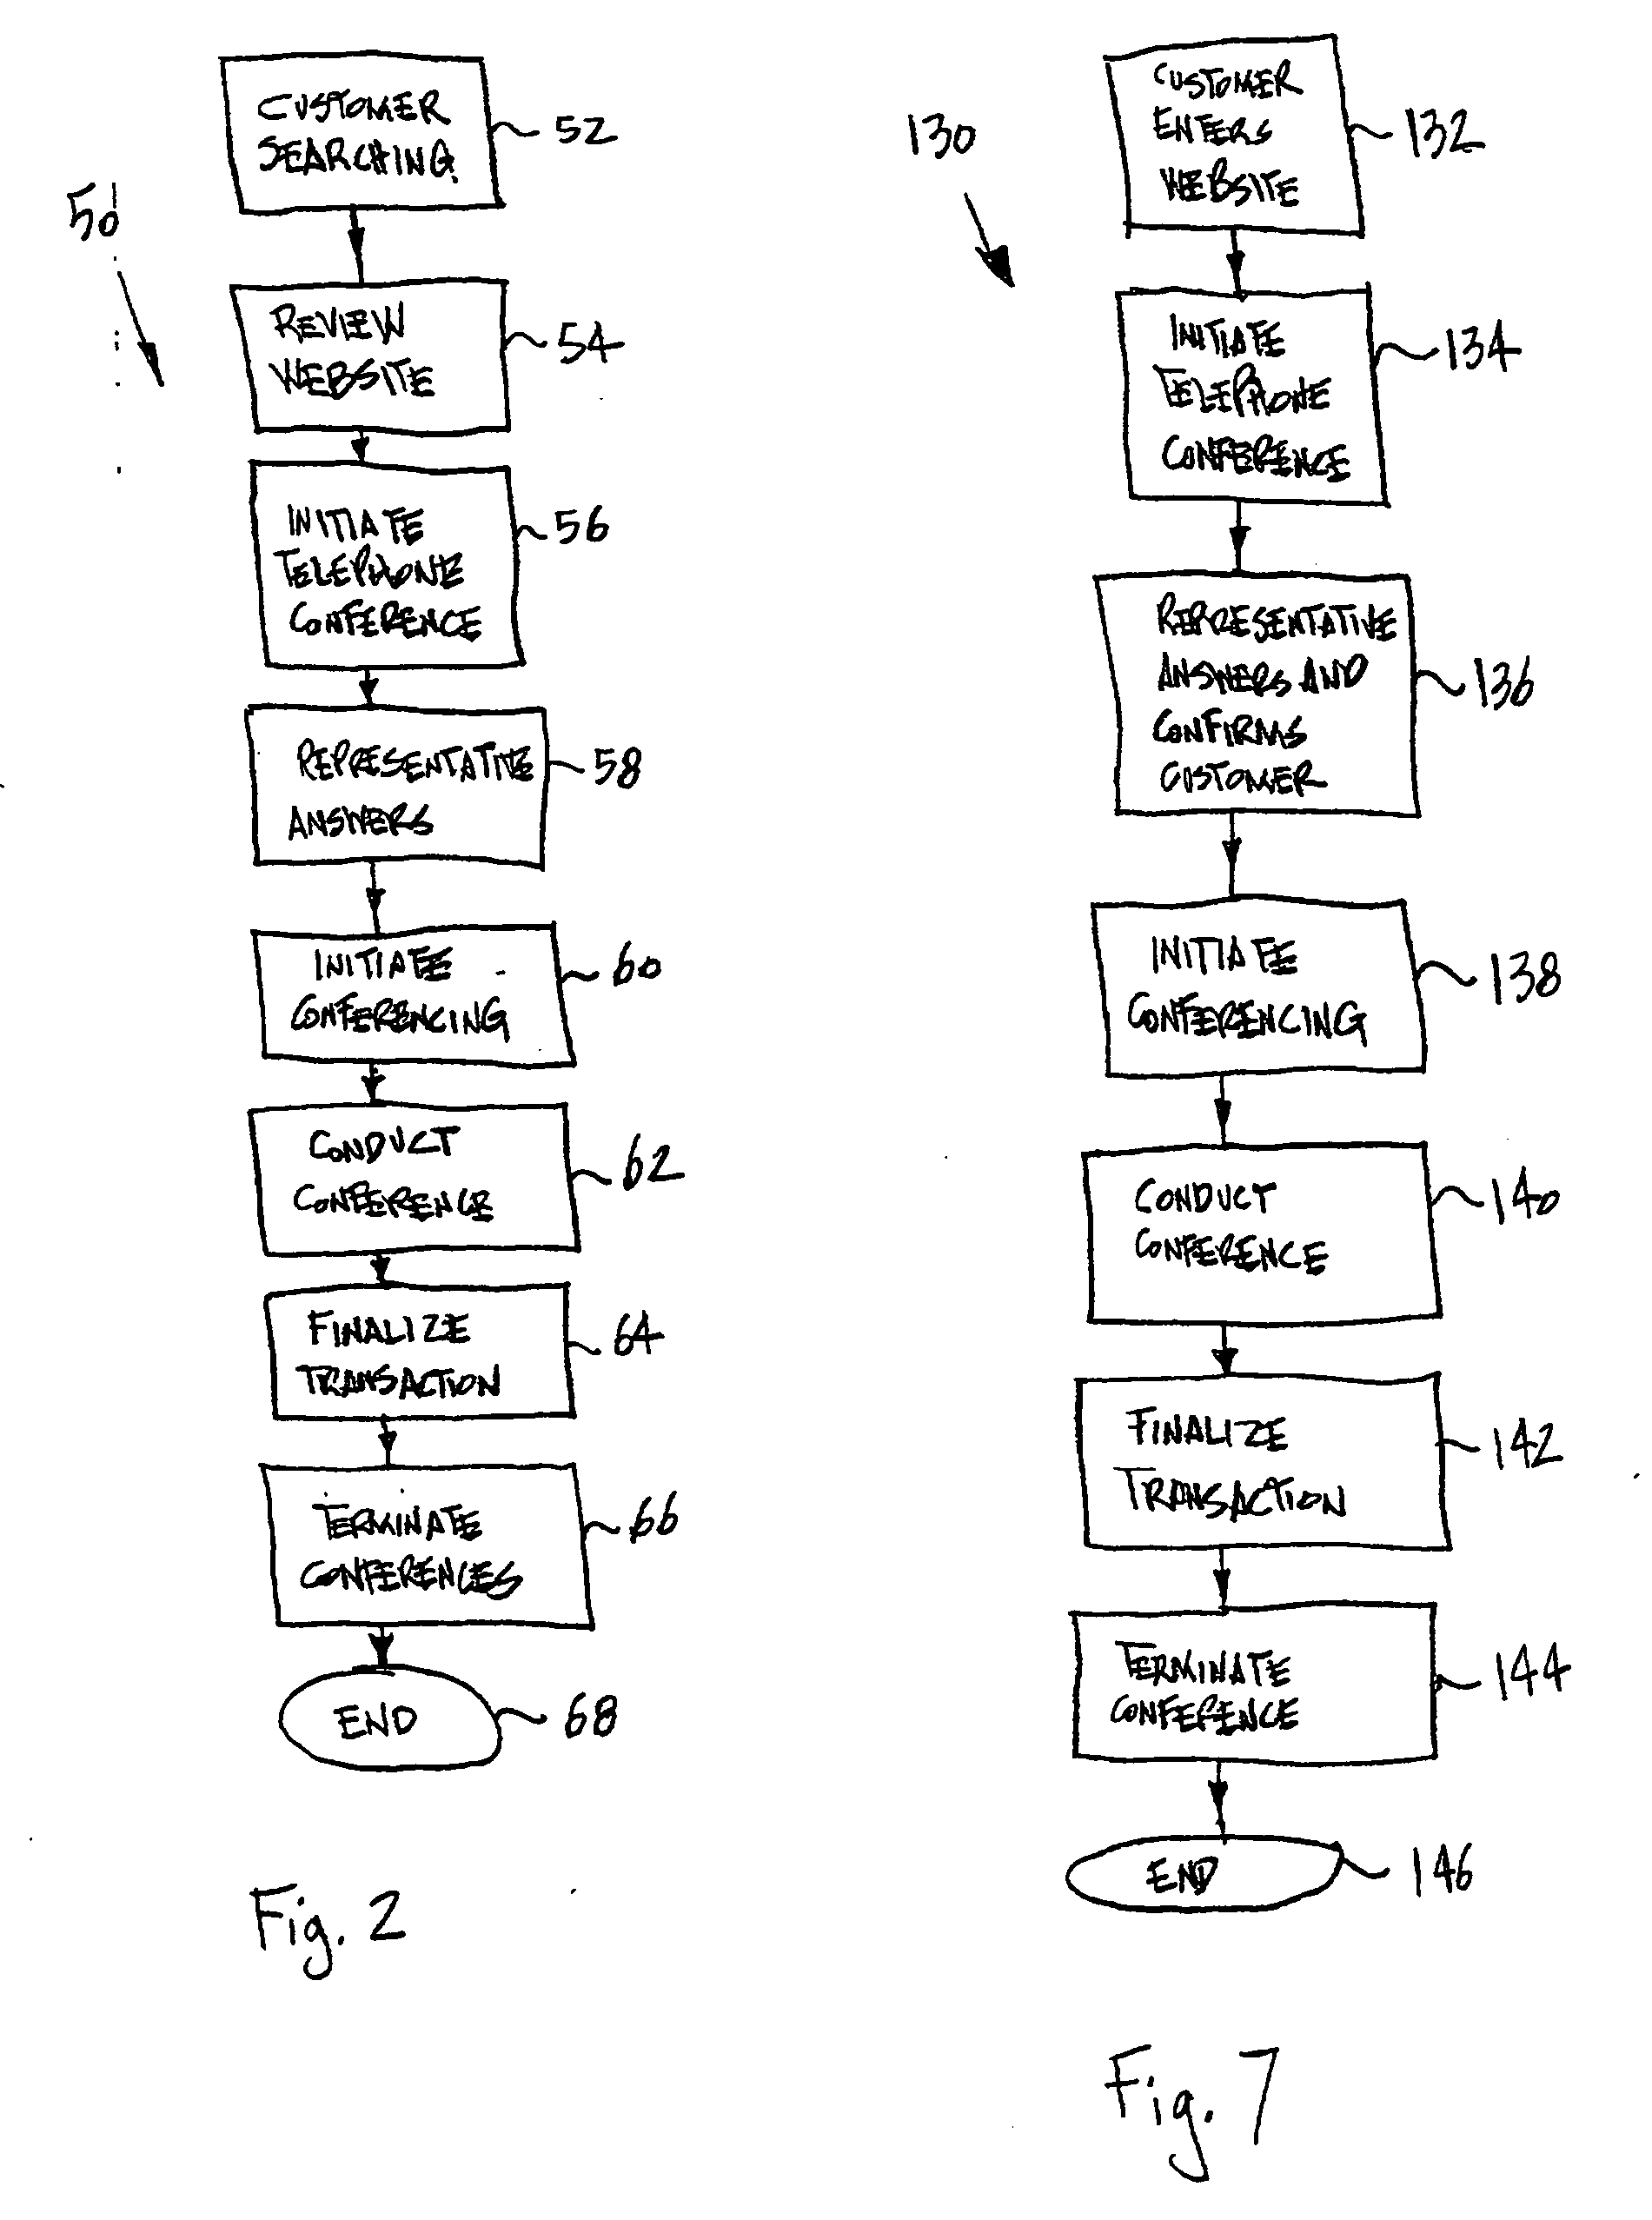 System and method for marketing products and services